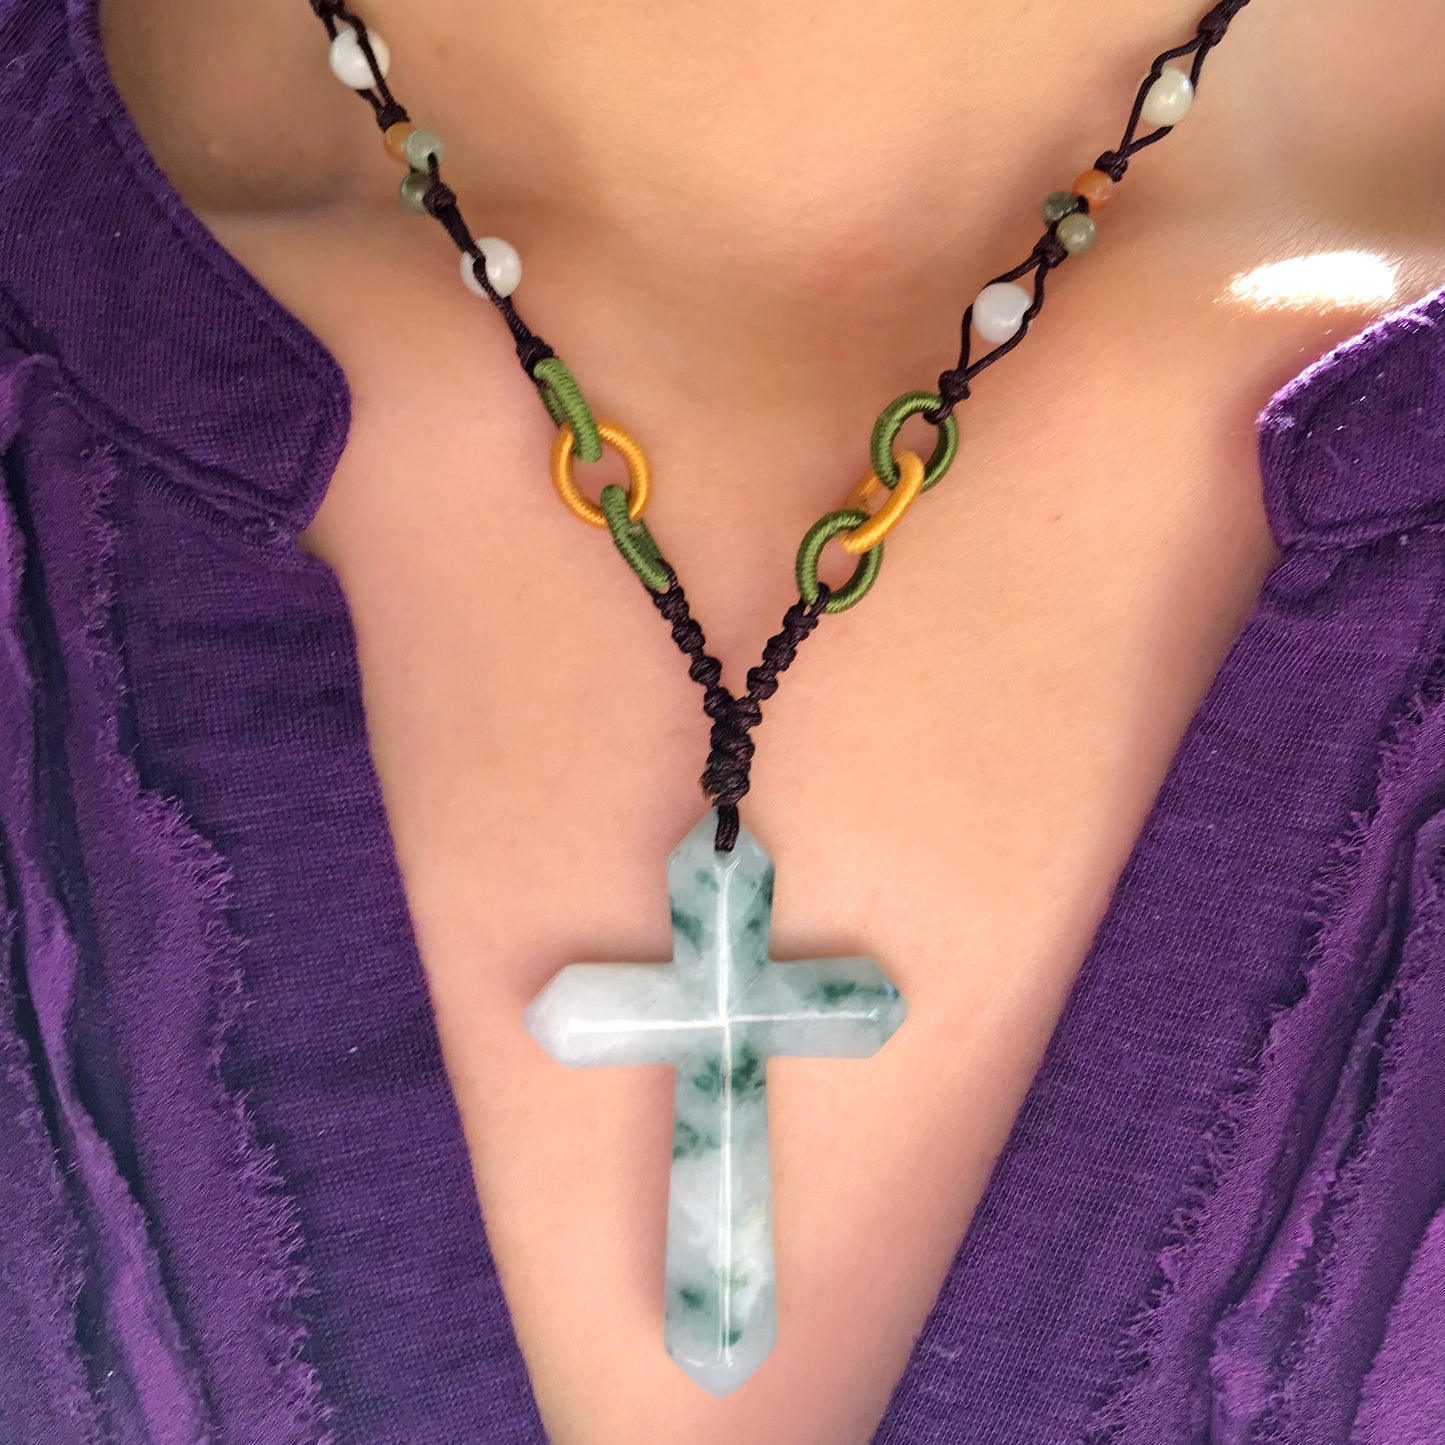 Uncover Faith with a Bold Cross Jade Necklace